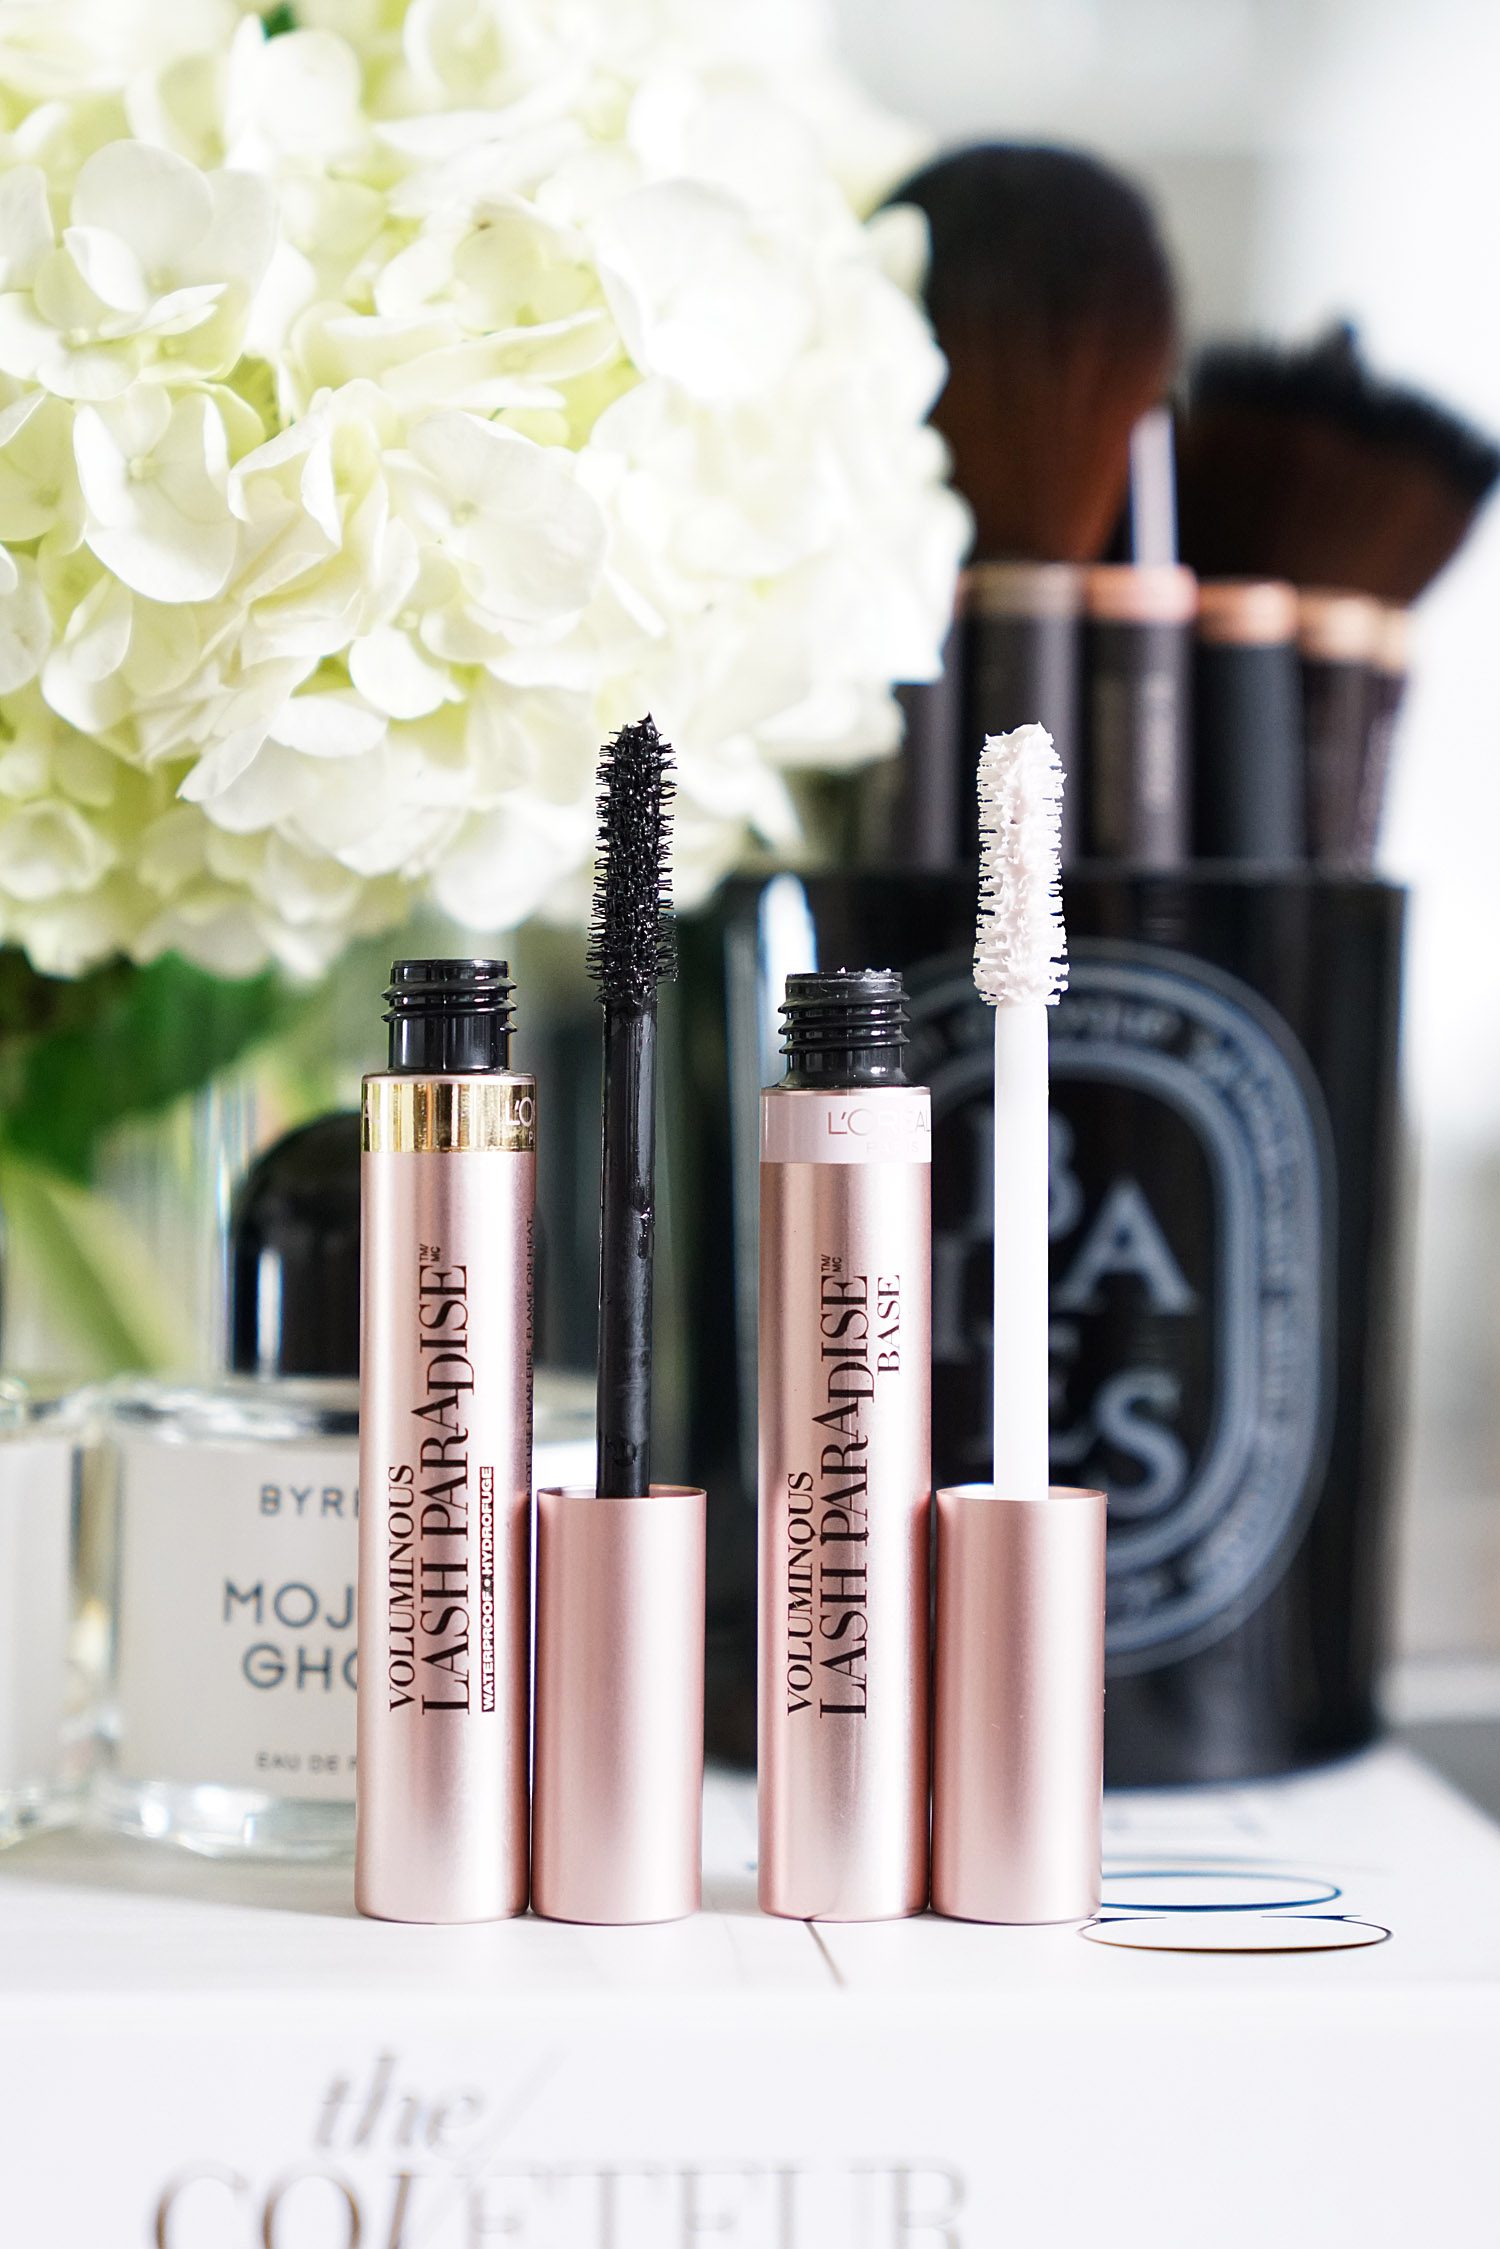 Le Volume de Chanel mascara review - Cosmetopia Digest Beauty and